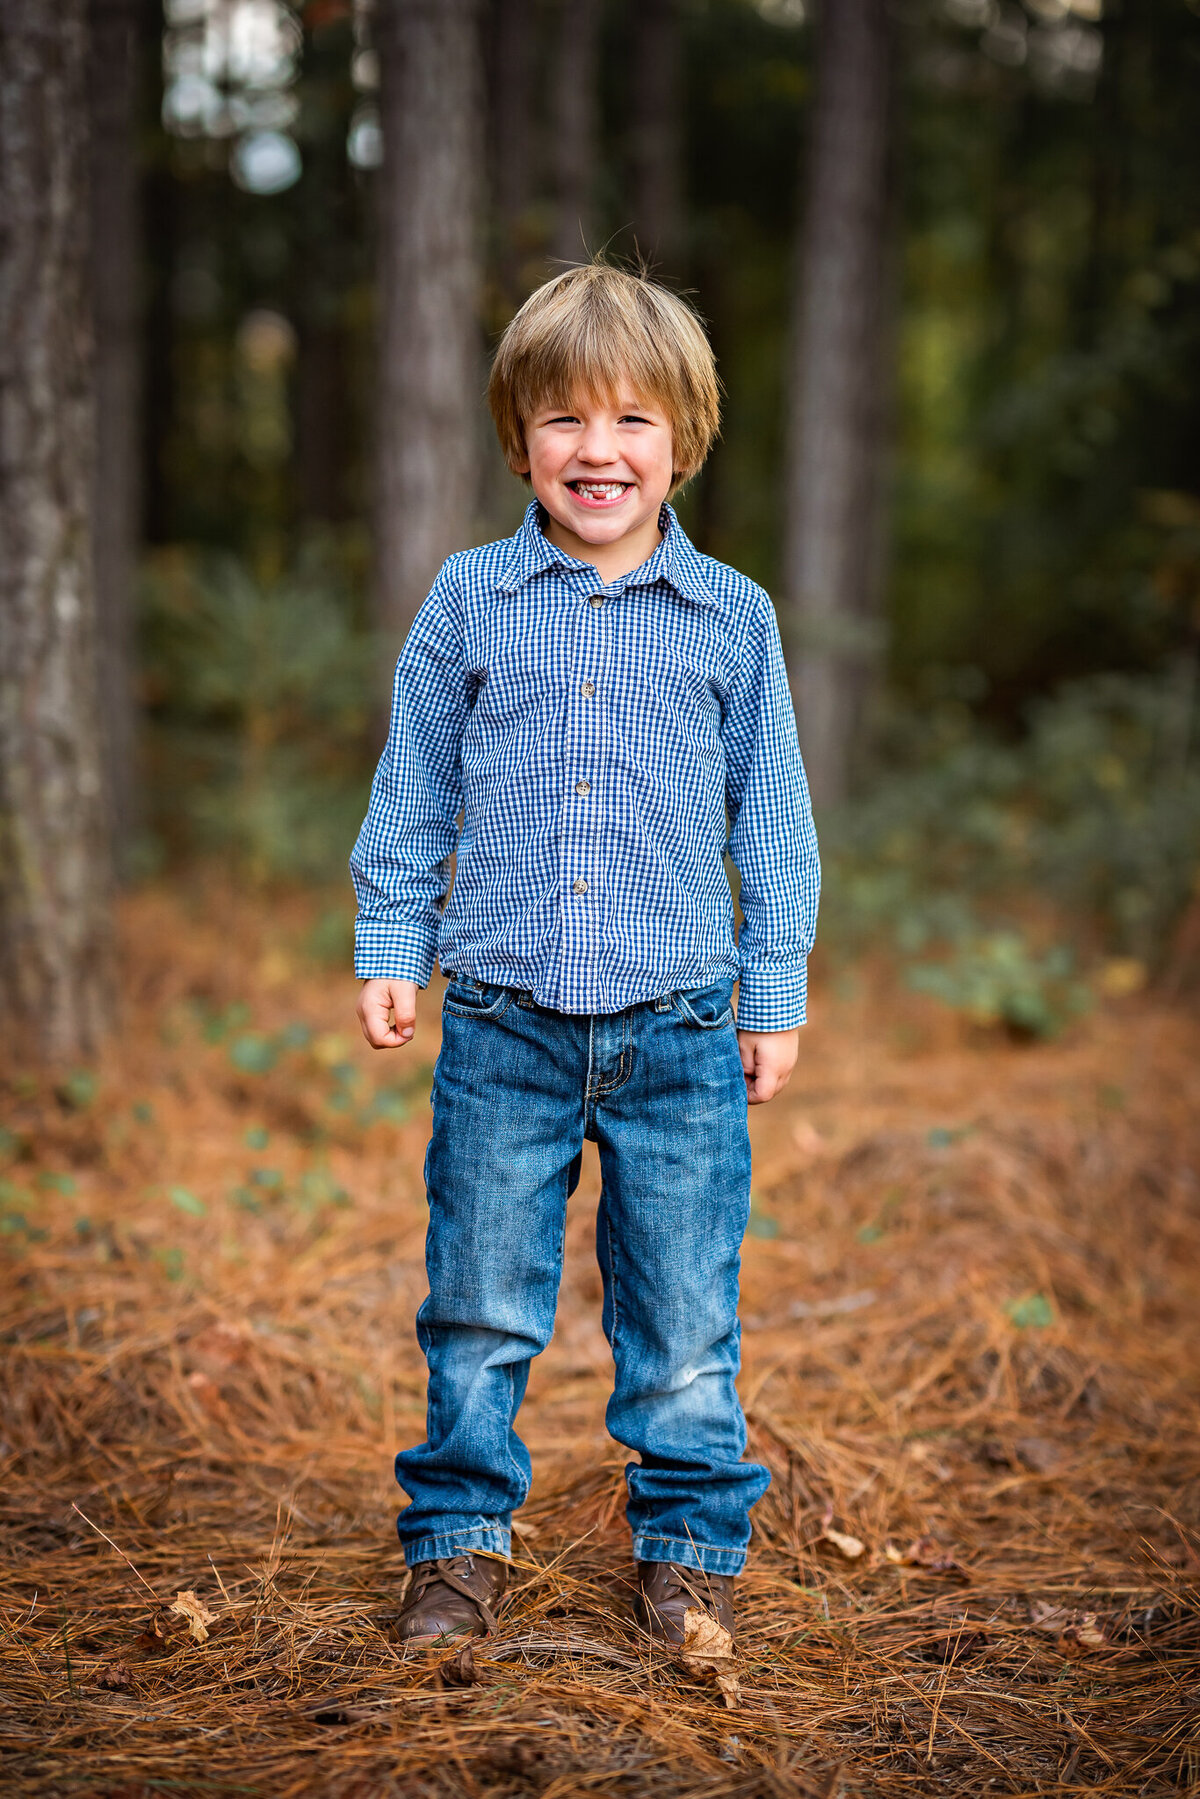 A young boy in a blue shirt is standing in the woods and smiling at the camera.